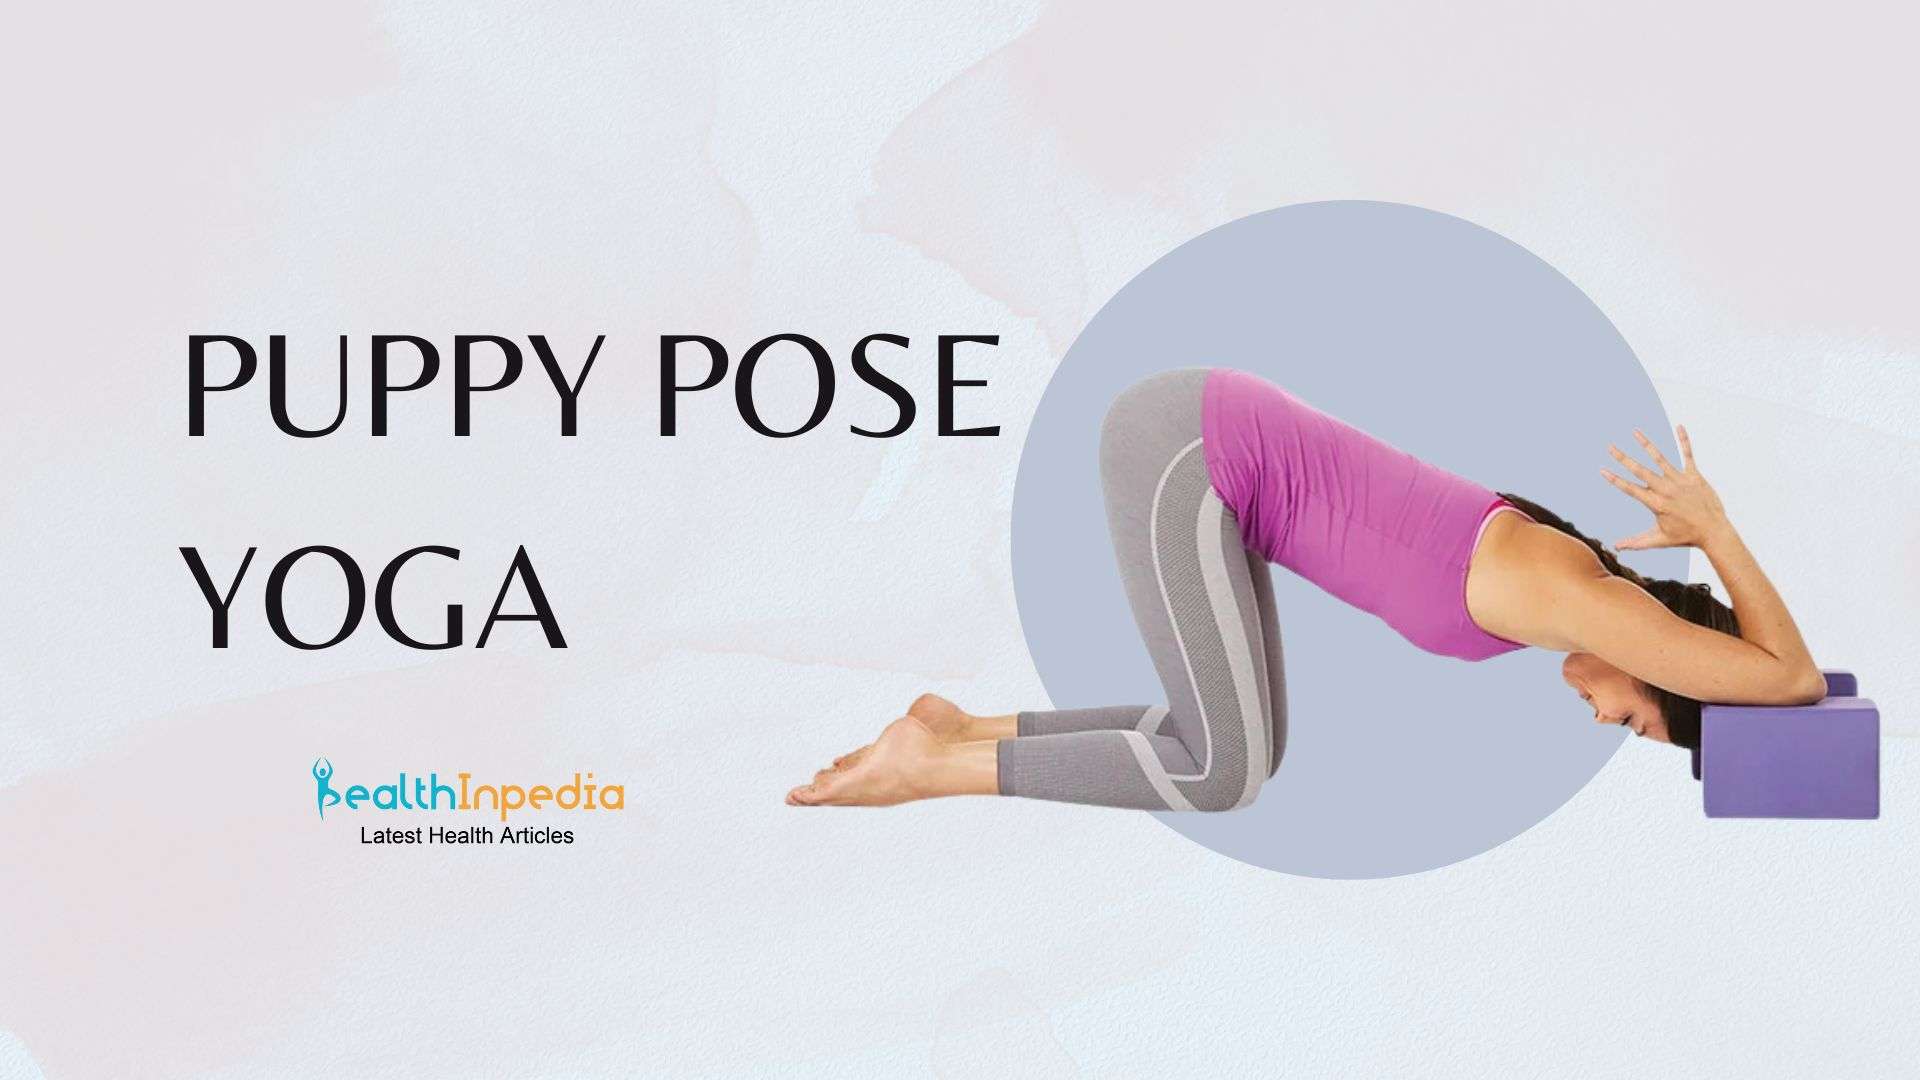 Puppy Pose Yoga: Meaning, Benefits and Step